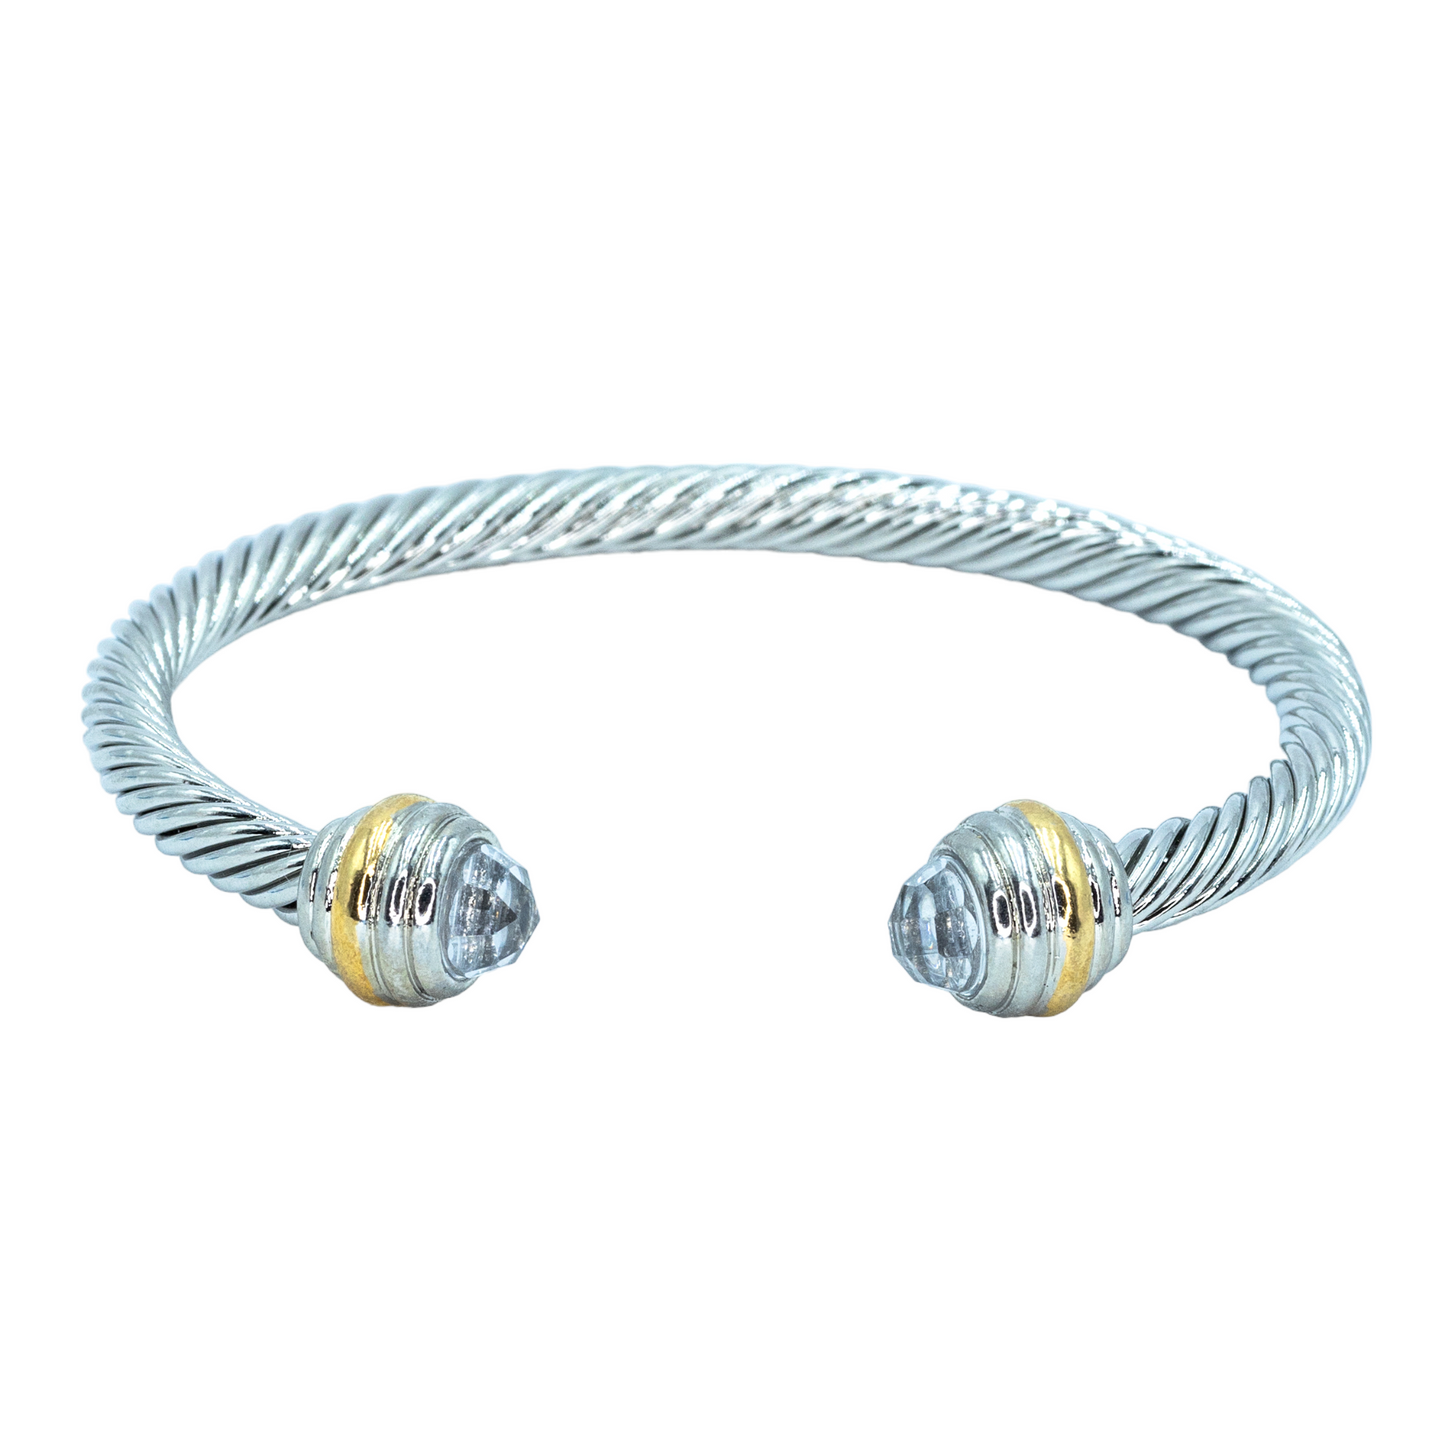 Rhodium plated w/ gold bangle and clear stone